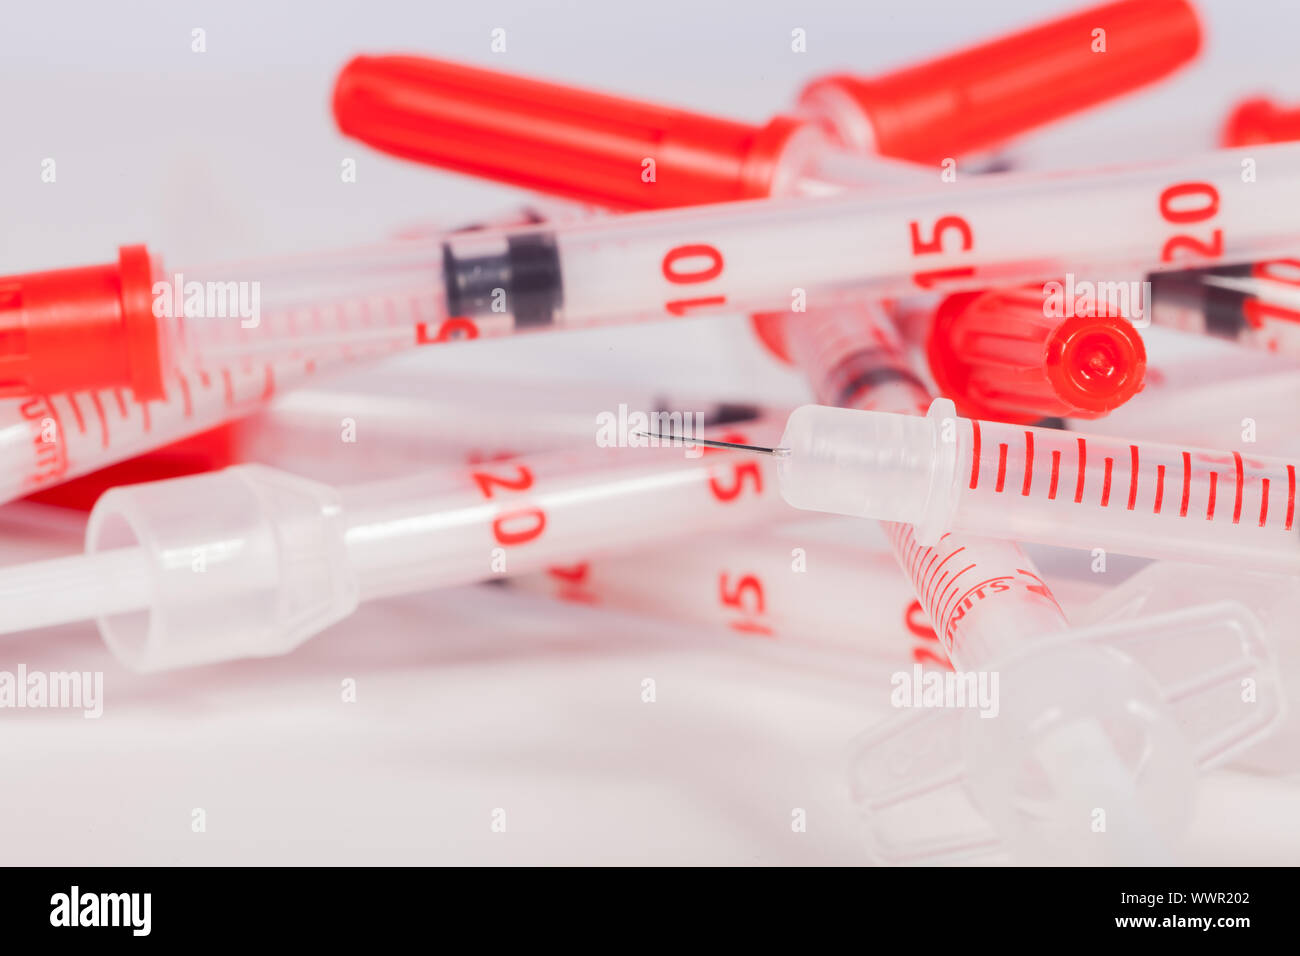 Pile of Empty Syringes with Red Safety Caps Stock Photo